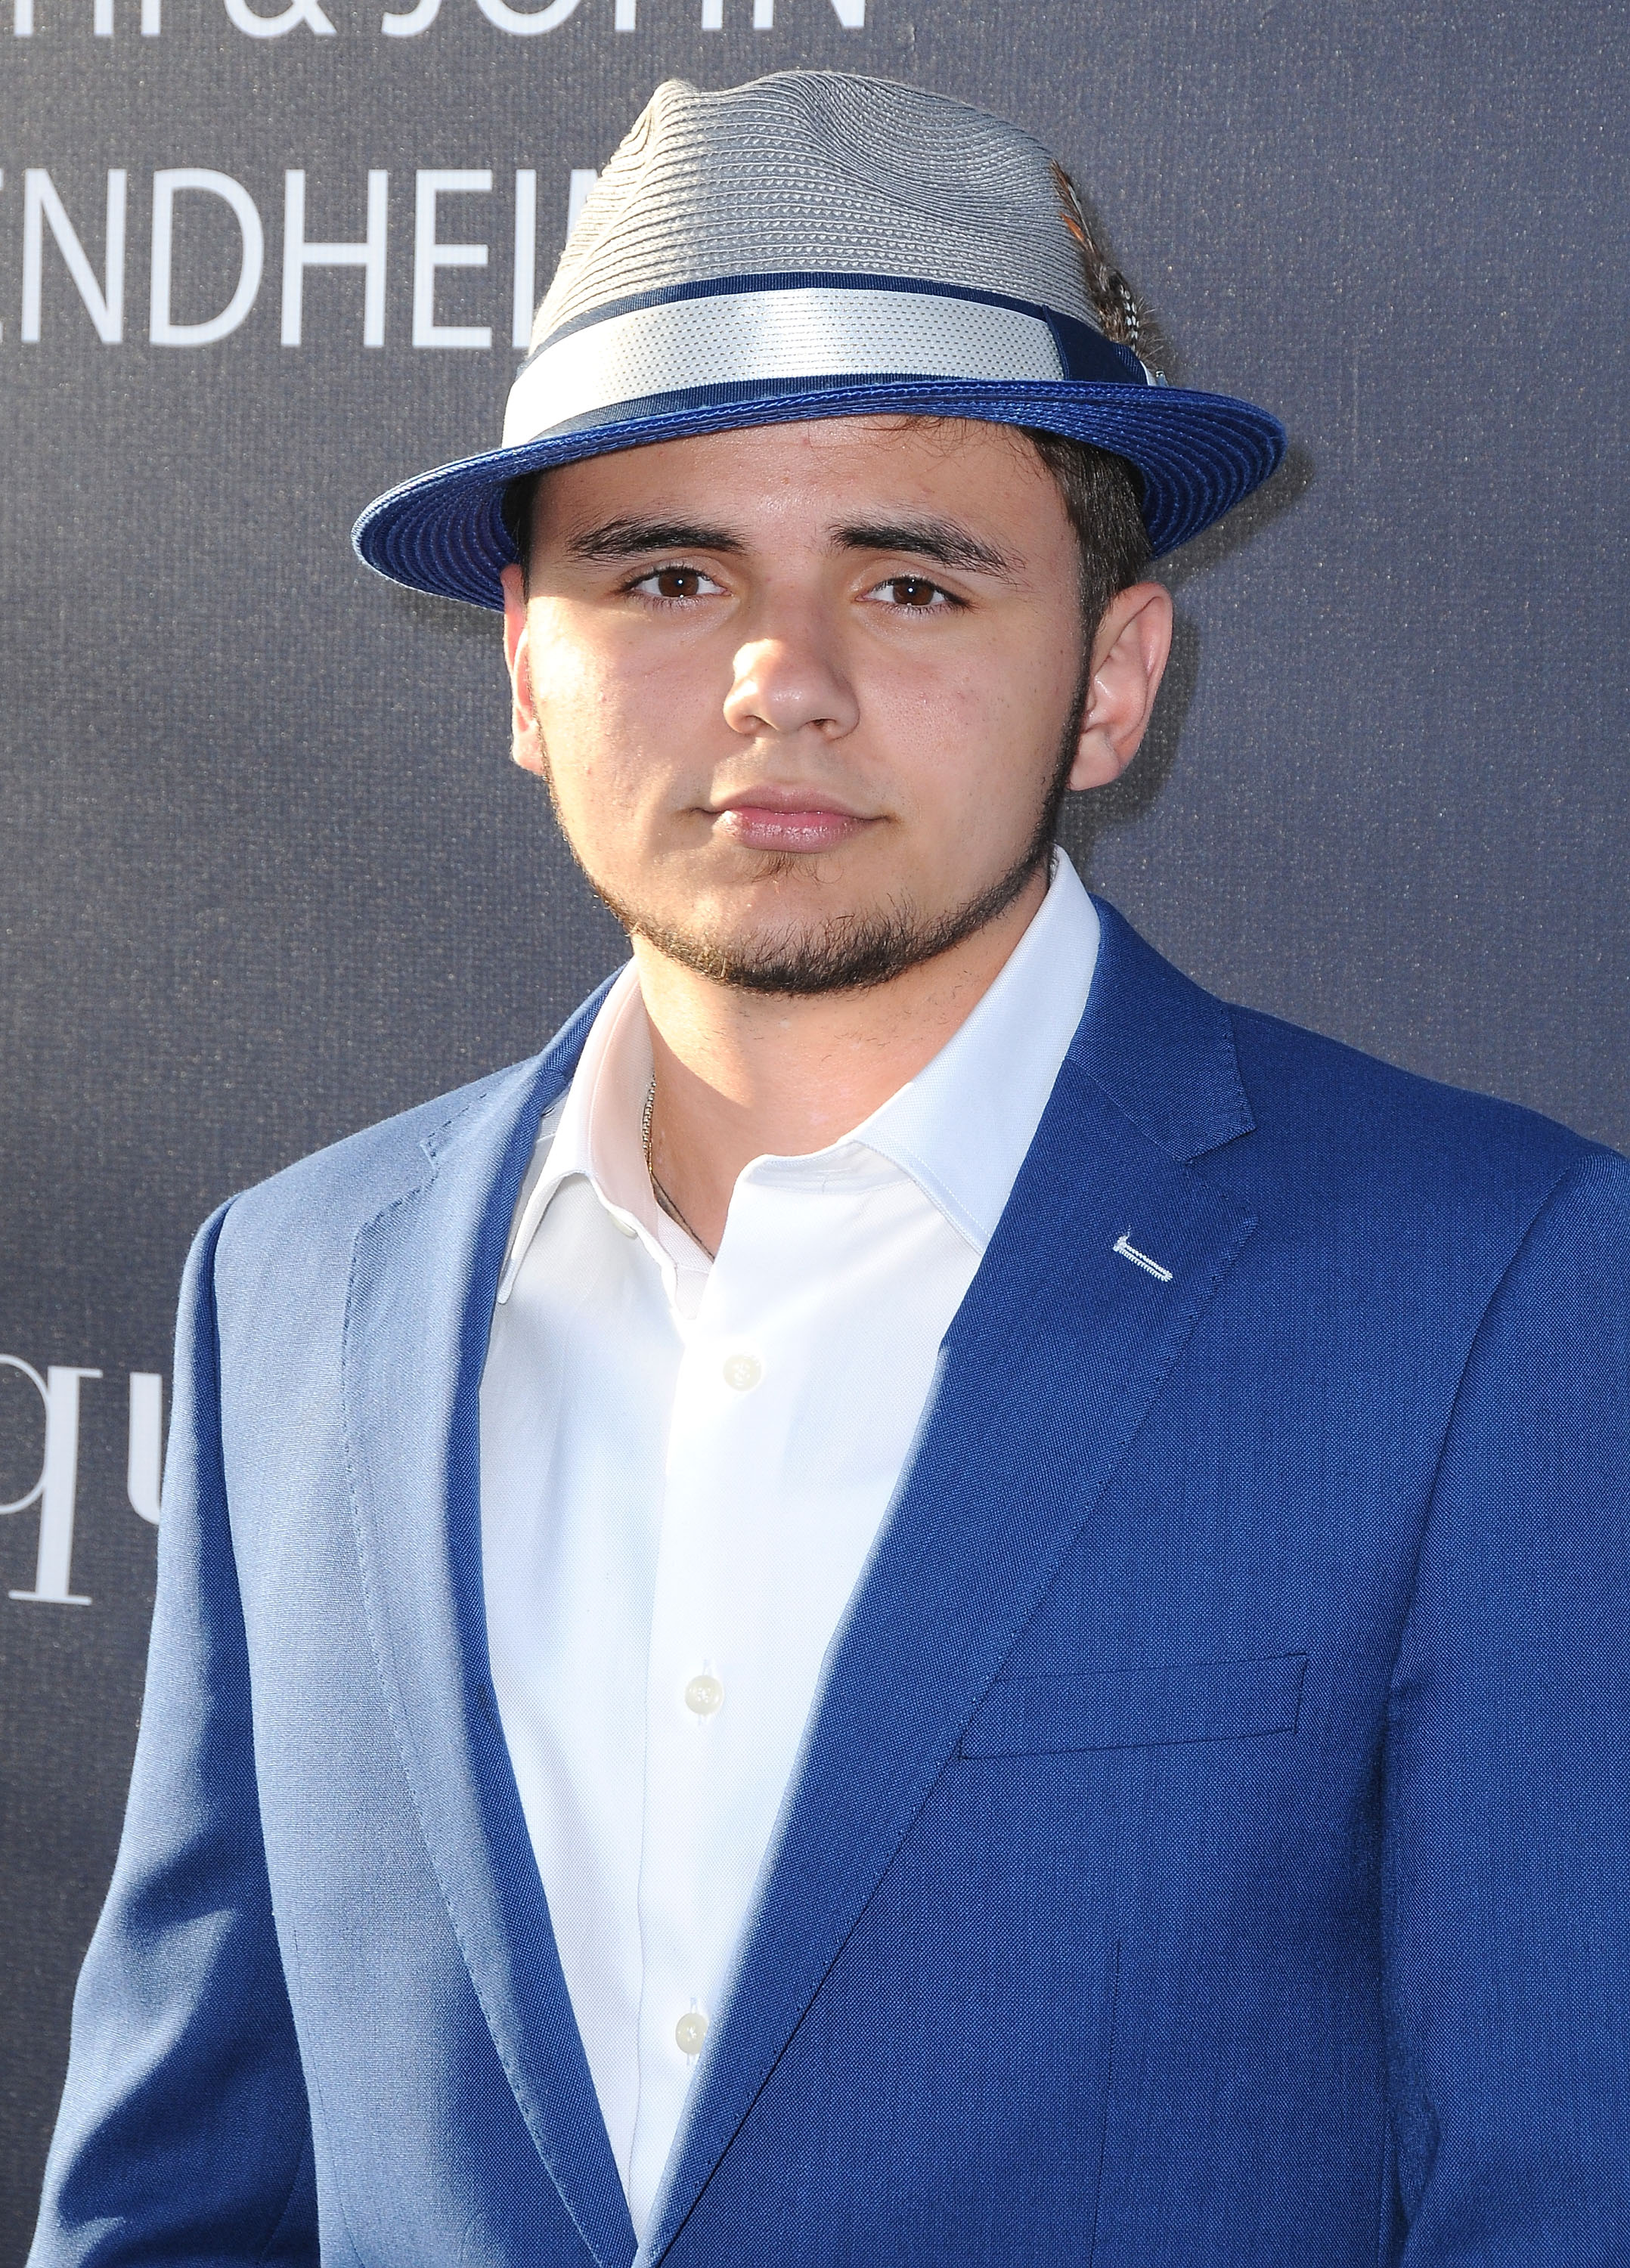 Prince Jackson attends Los Angeles Dodgers Foundation's 3rd Annual Blue Diamond Gala at Dodger Stadium on June 8, 2017 in Los Angeles, California | Photo: Getty Images